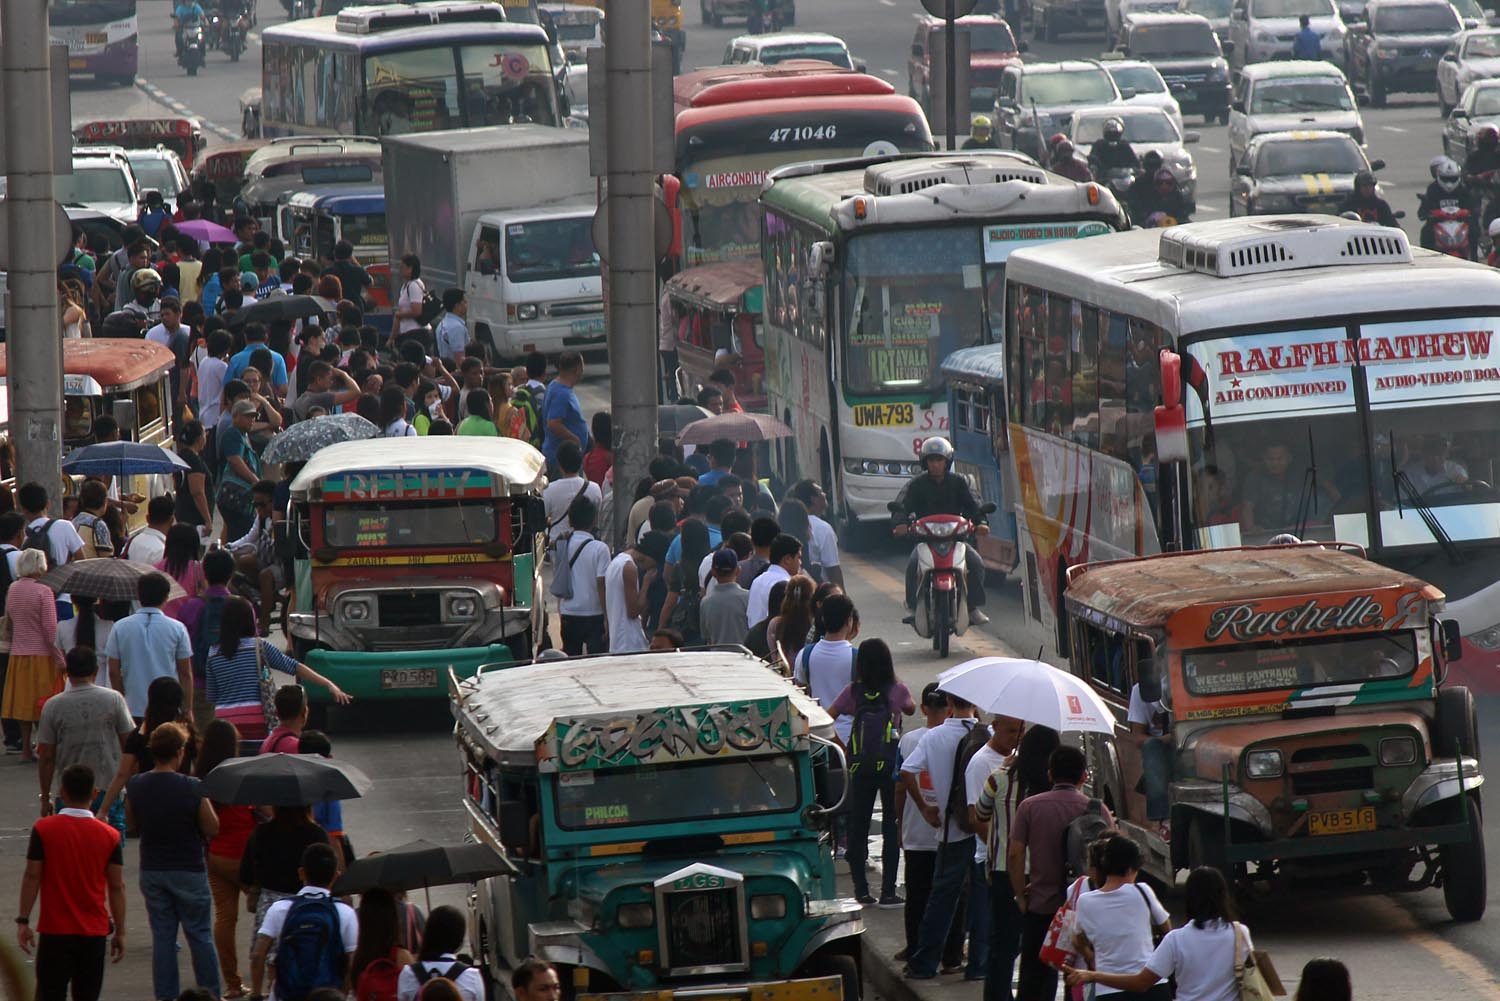 SAF troopers to join HPG in manning EDSA traffic